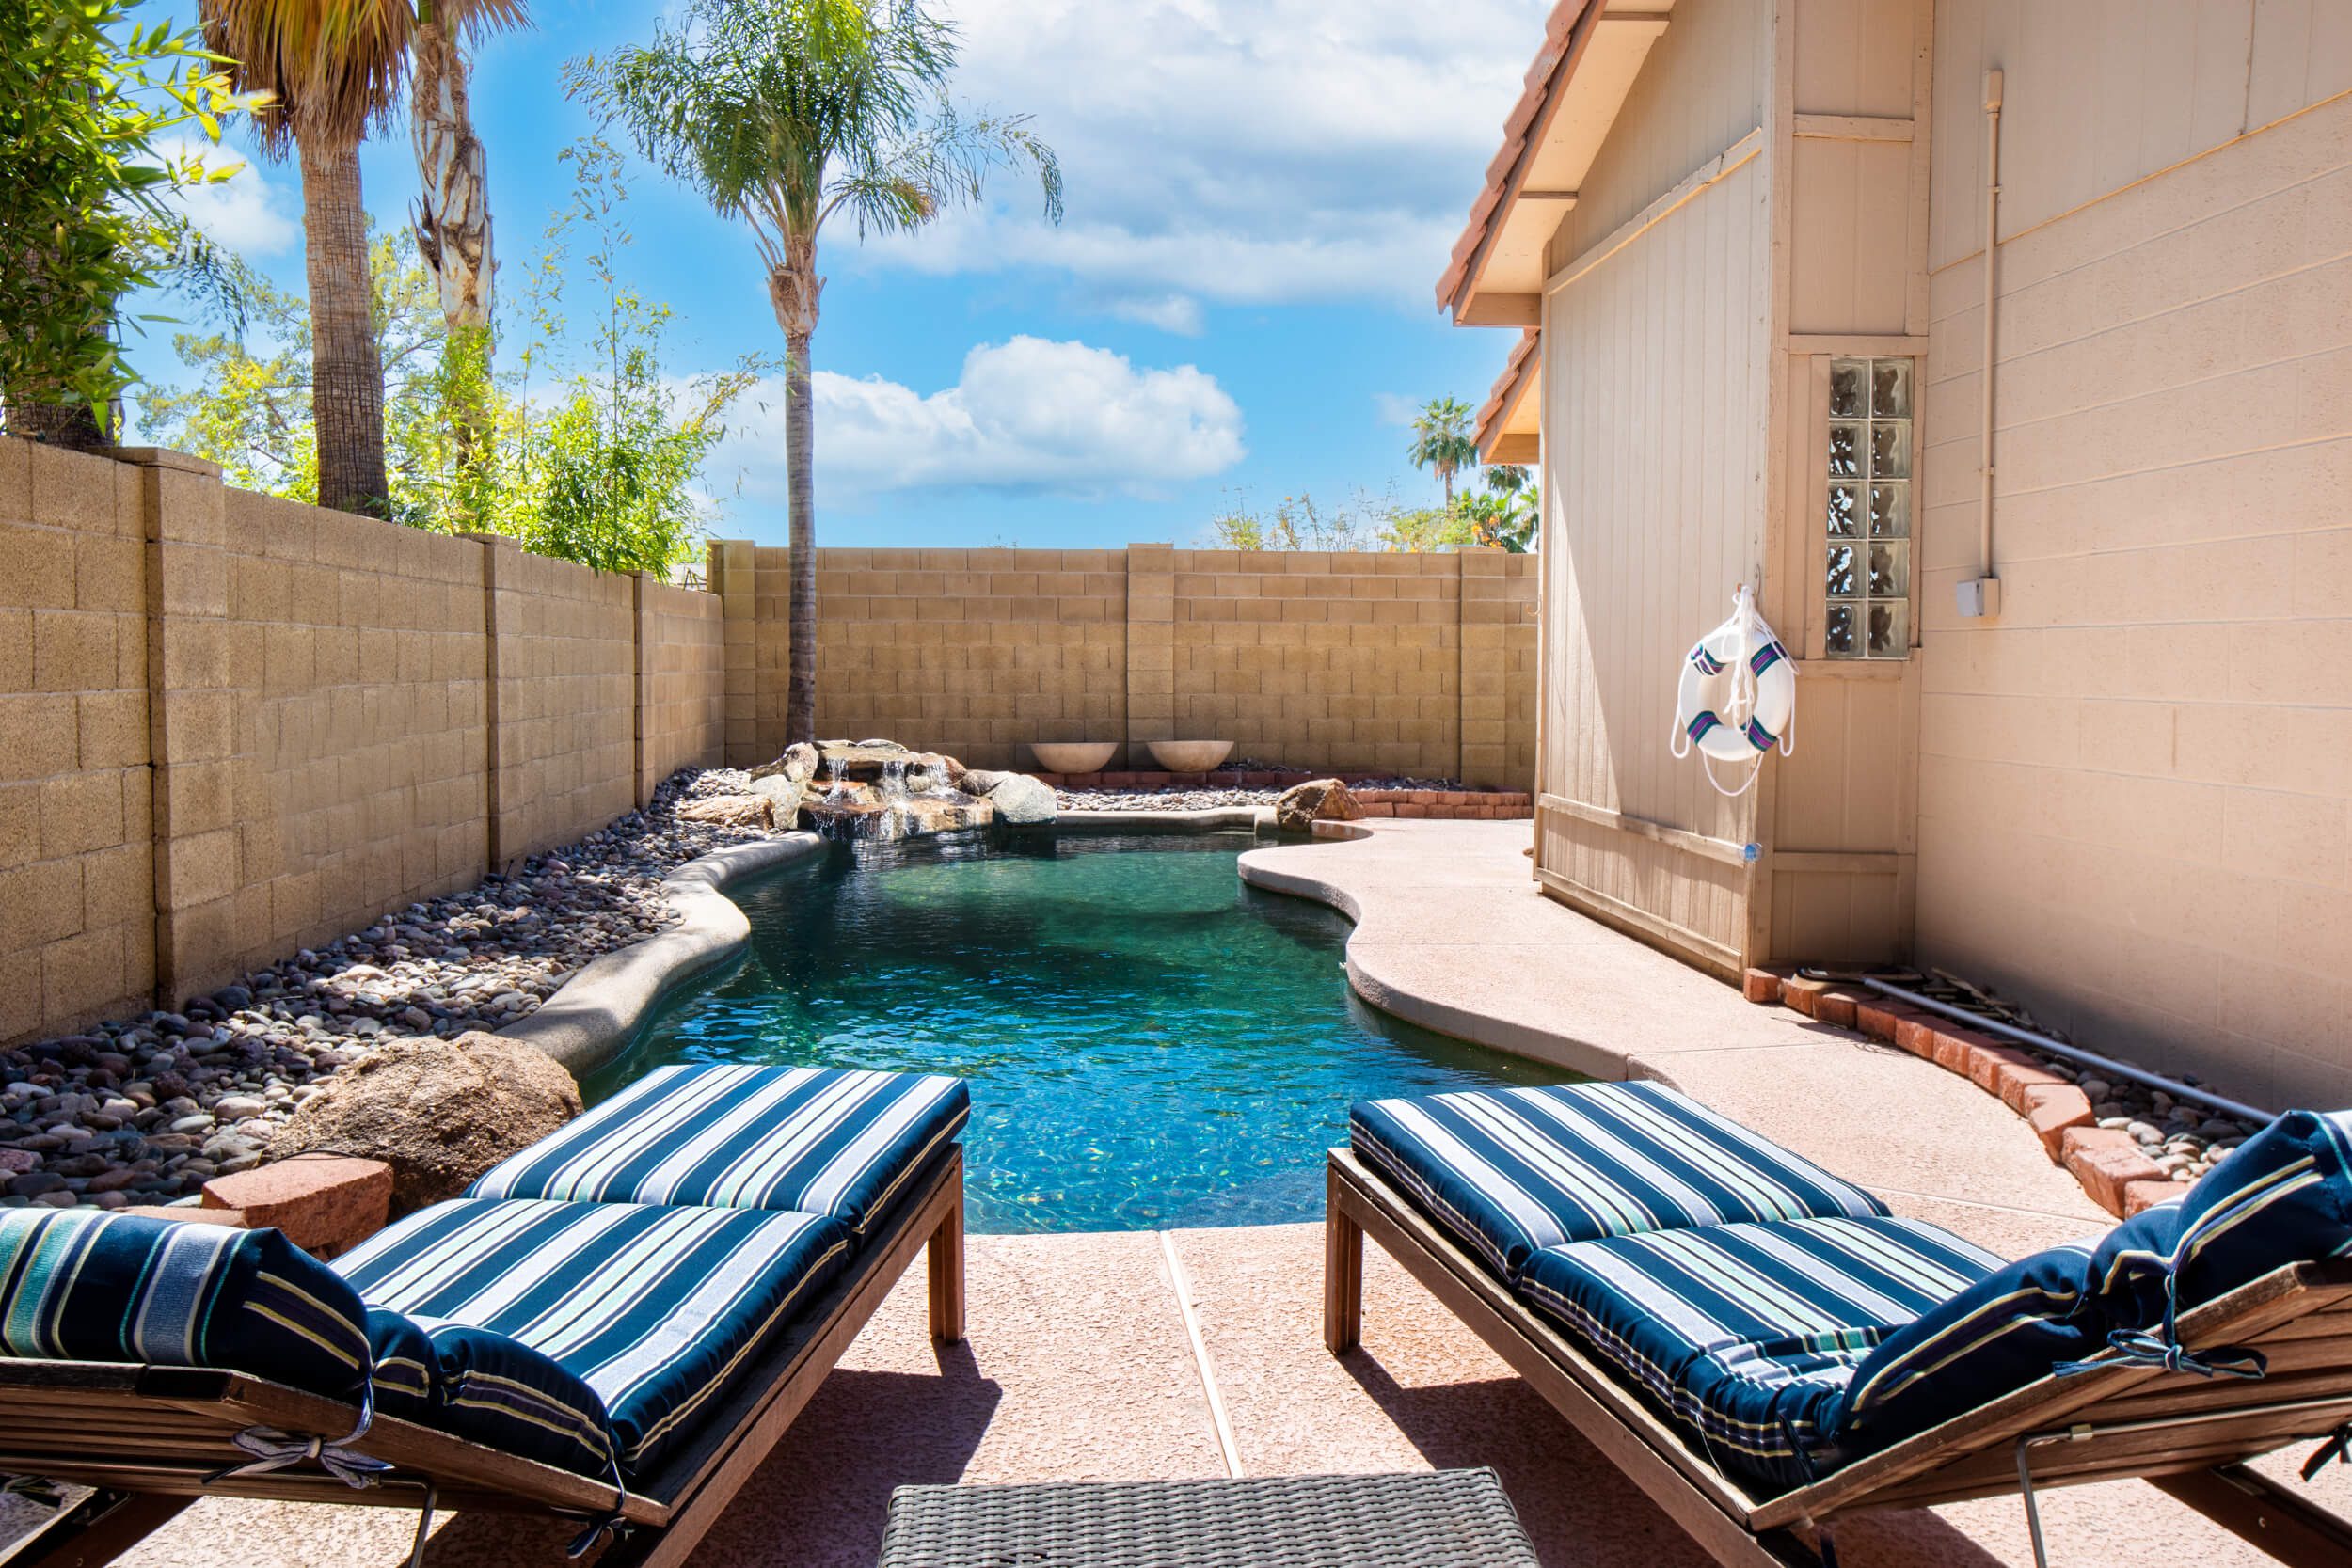 Swimming pool at high end recovery living in Scottsdale AZ.